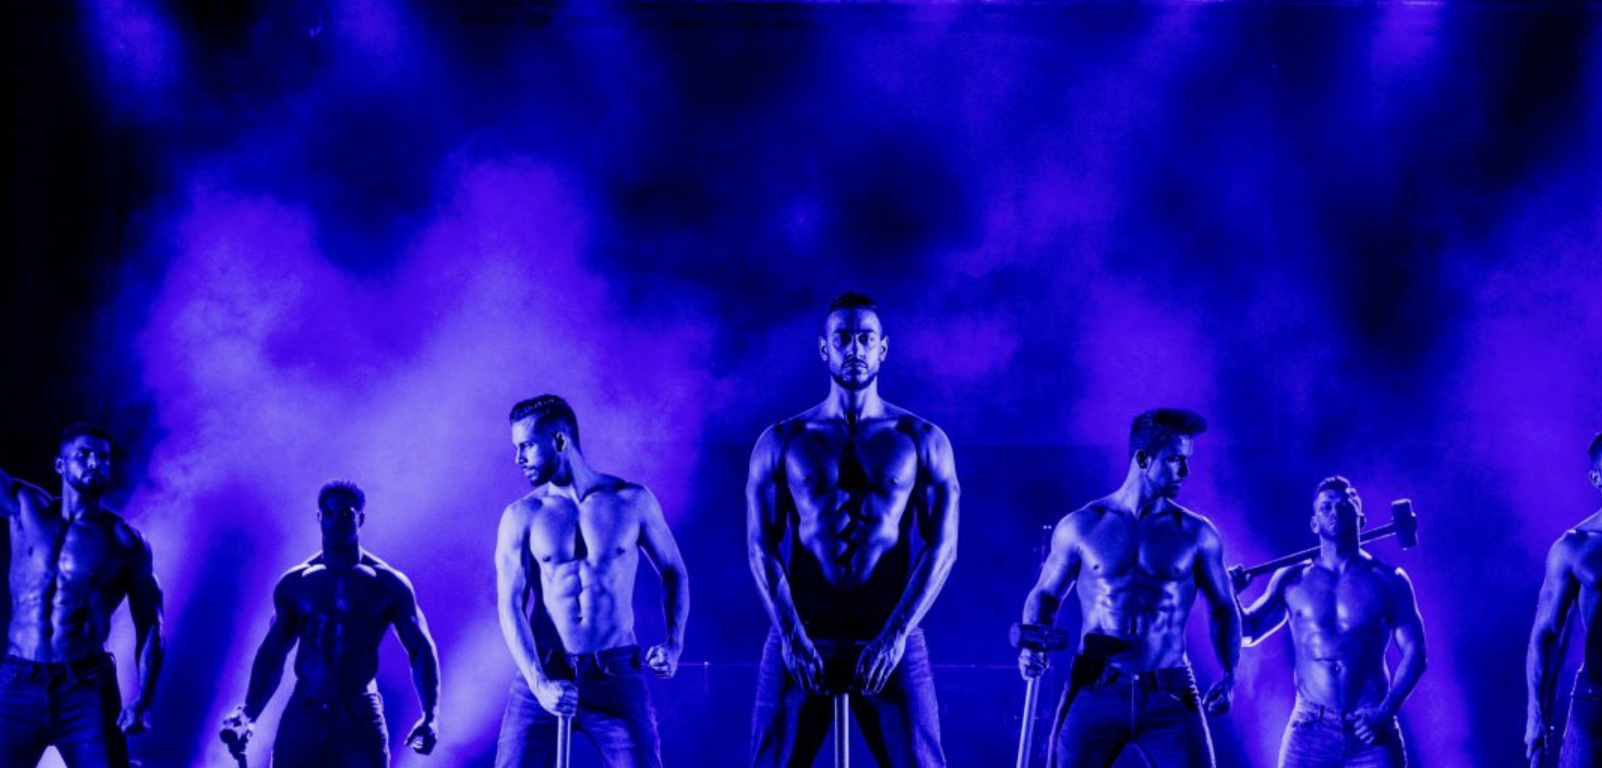 THE CHIPPENDALES am 24. March 2023 @ Arena Nova.